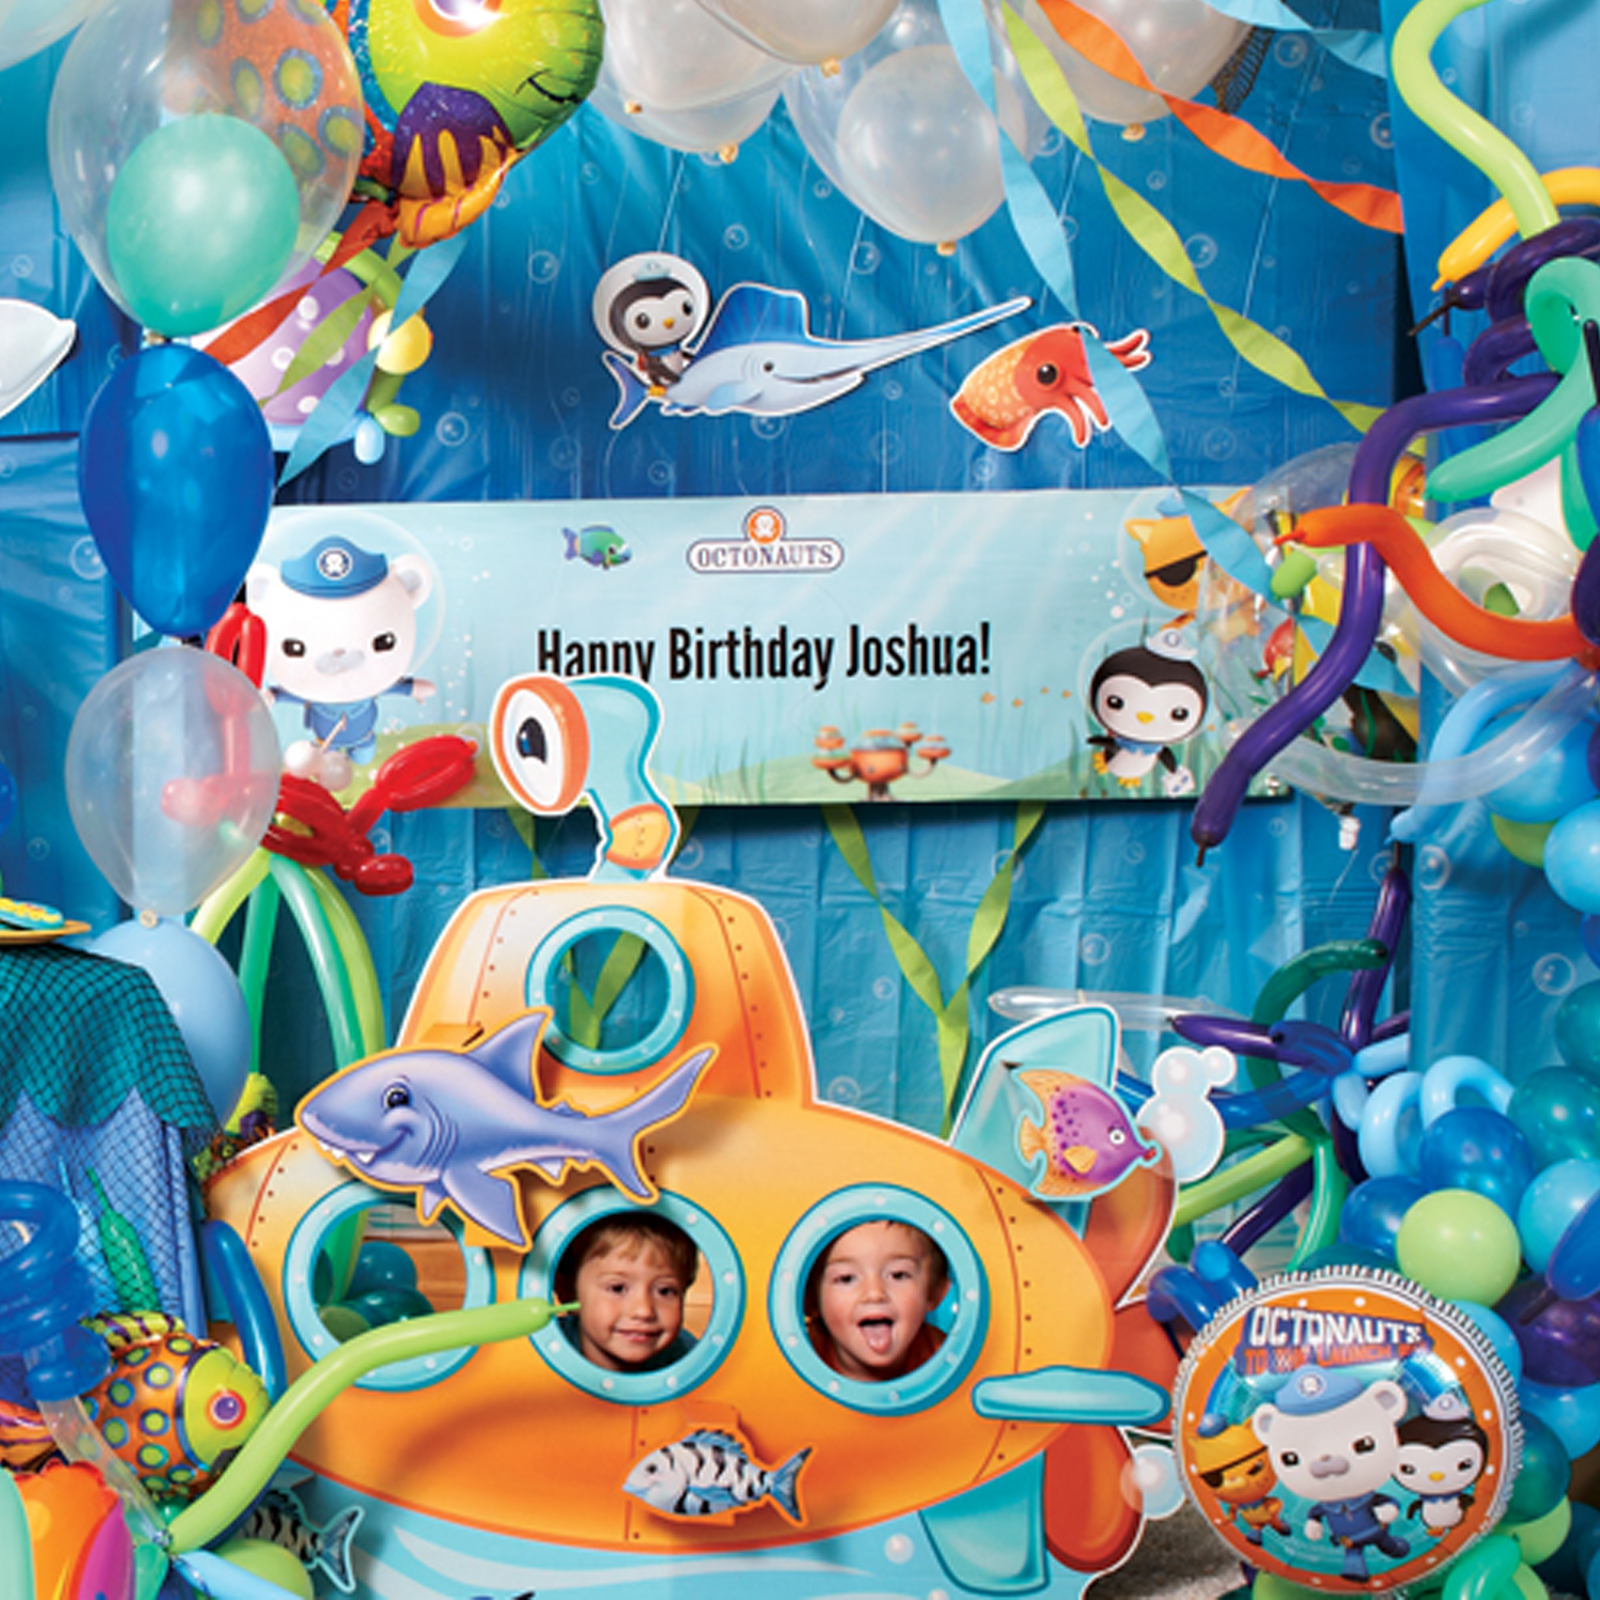 The Octonauts Party in a Box For 8 | BirthdayExpress.com